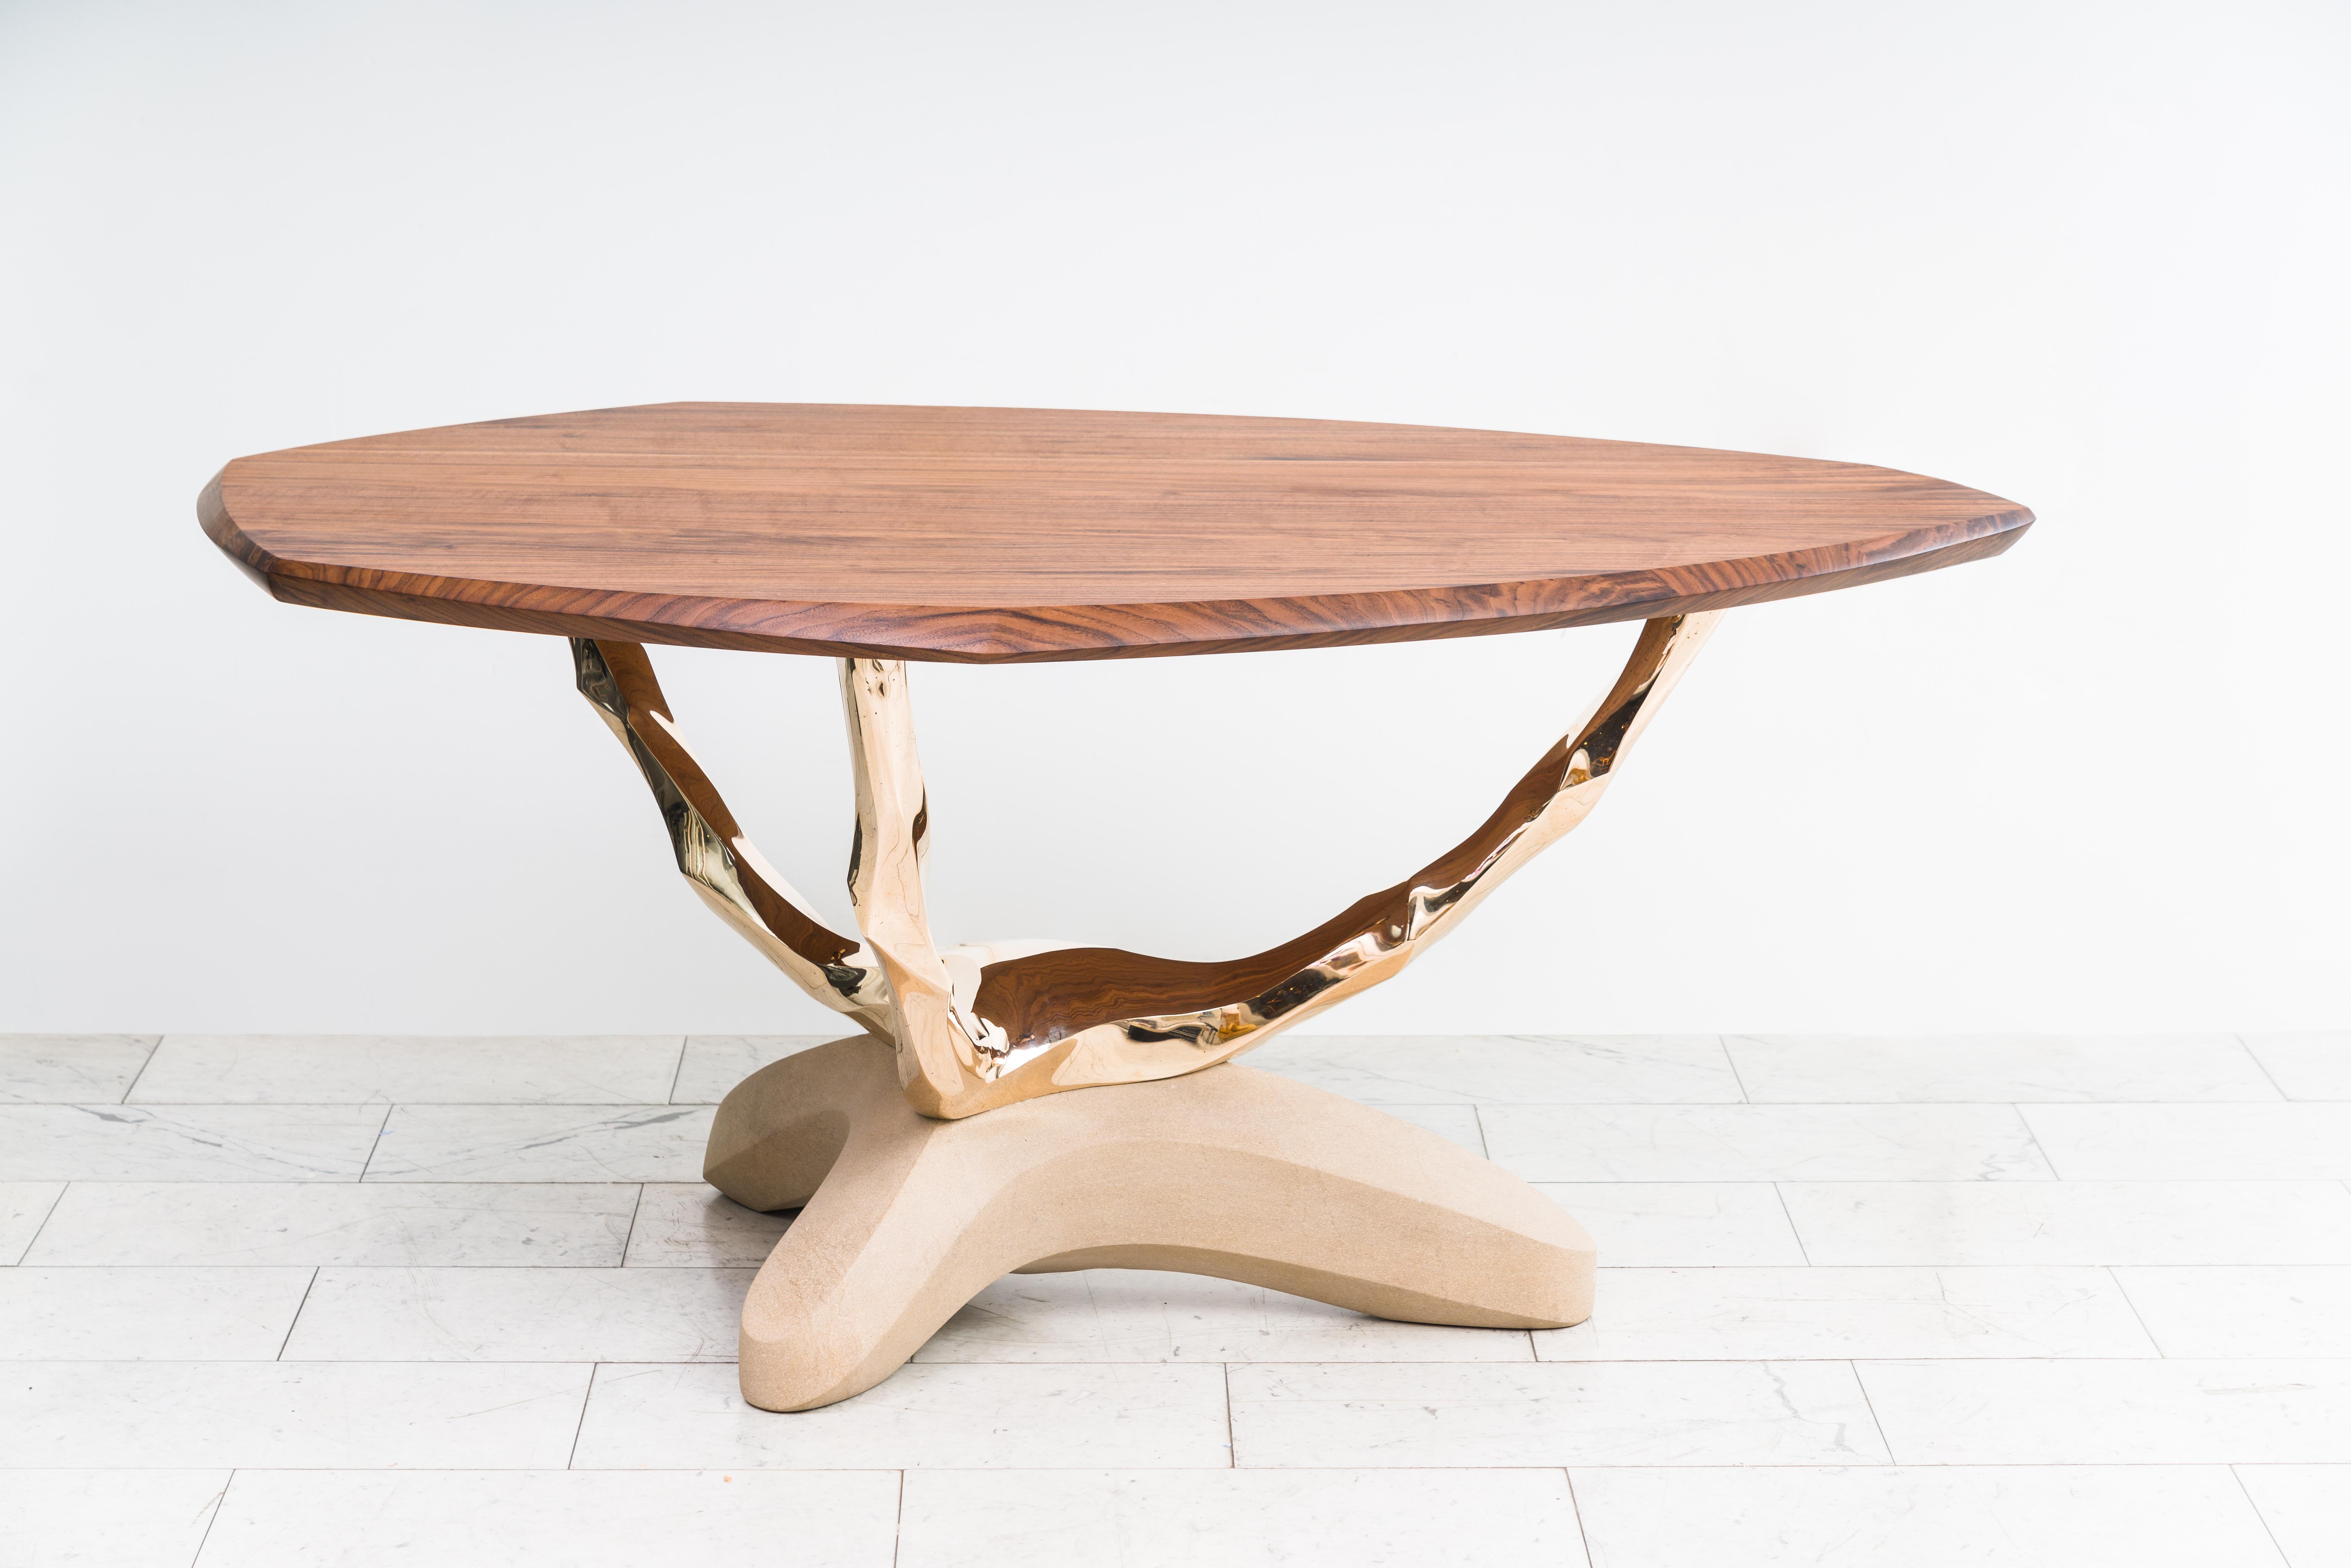 Markus Haase, Bronze, Walnut, and Limestone Foyer Table, Usa In New Condition For Sale In New York, NY